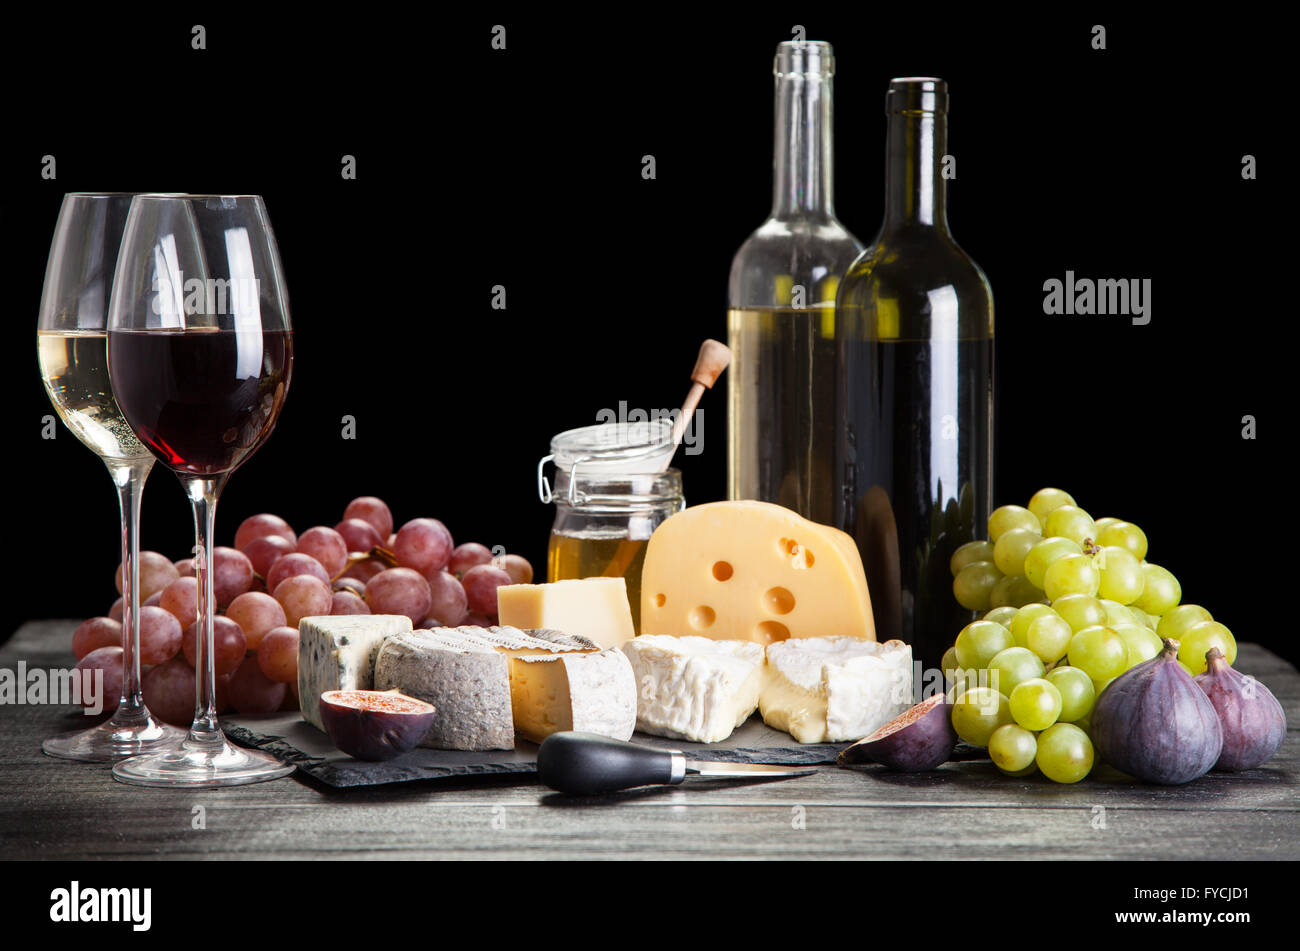 Wine, grapes and cheese Stock Photo